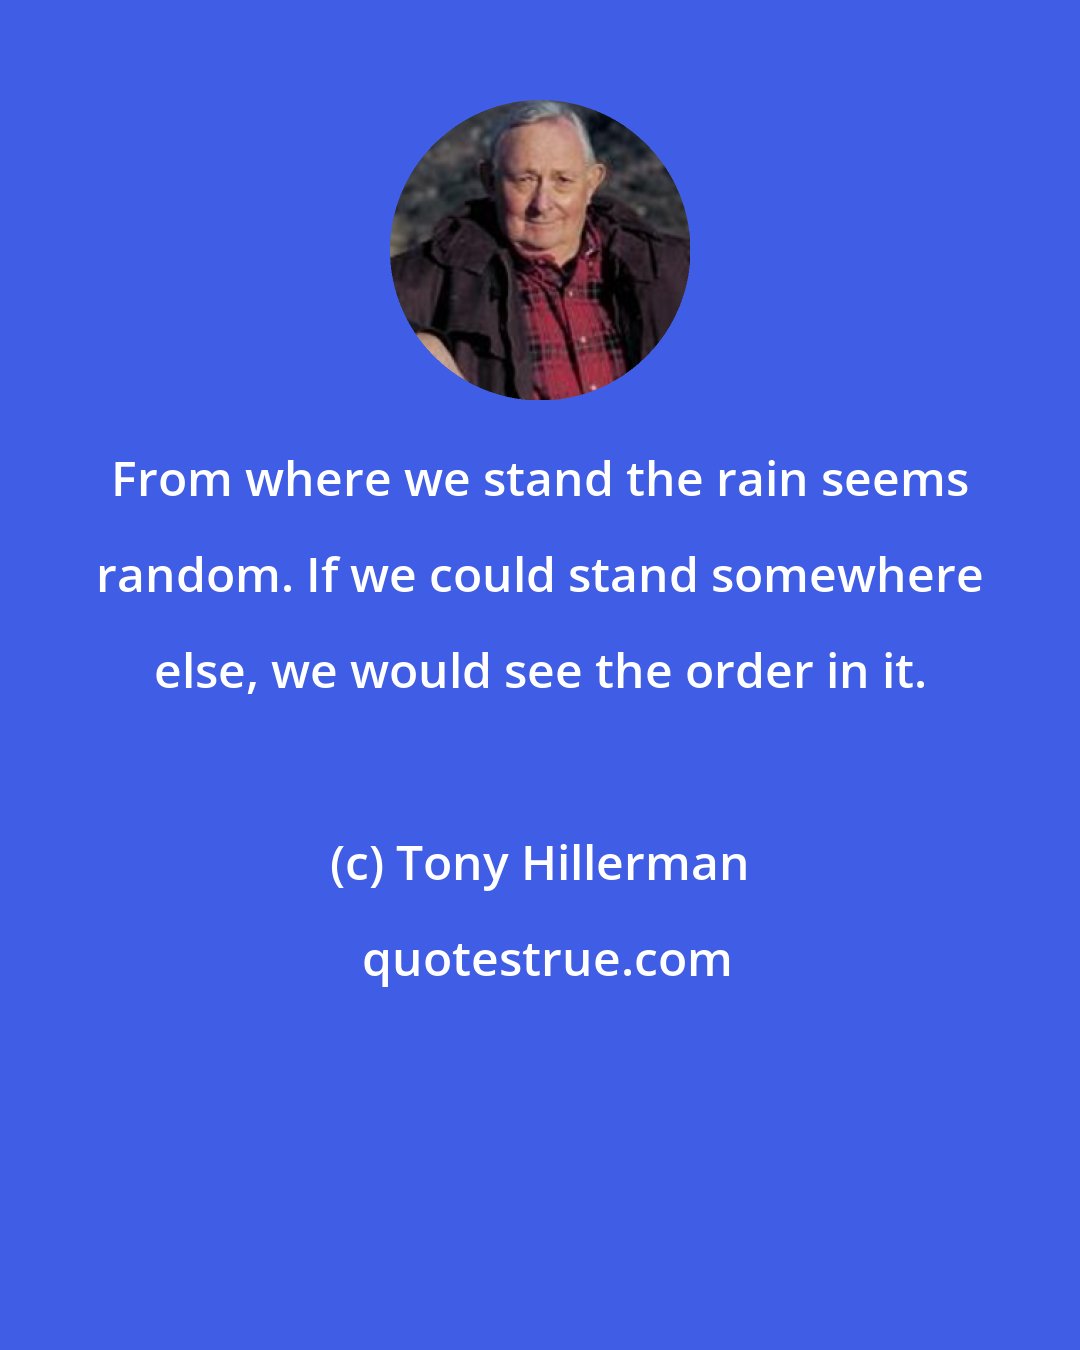 Tony Hillerman: From where we stand the rain seems random. If we could stand somewhere else, we would see the order in it.